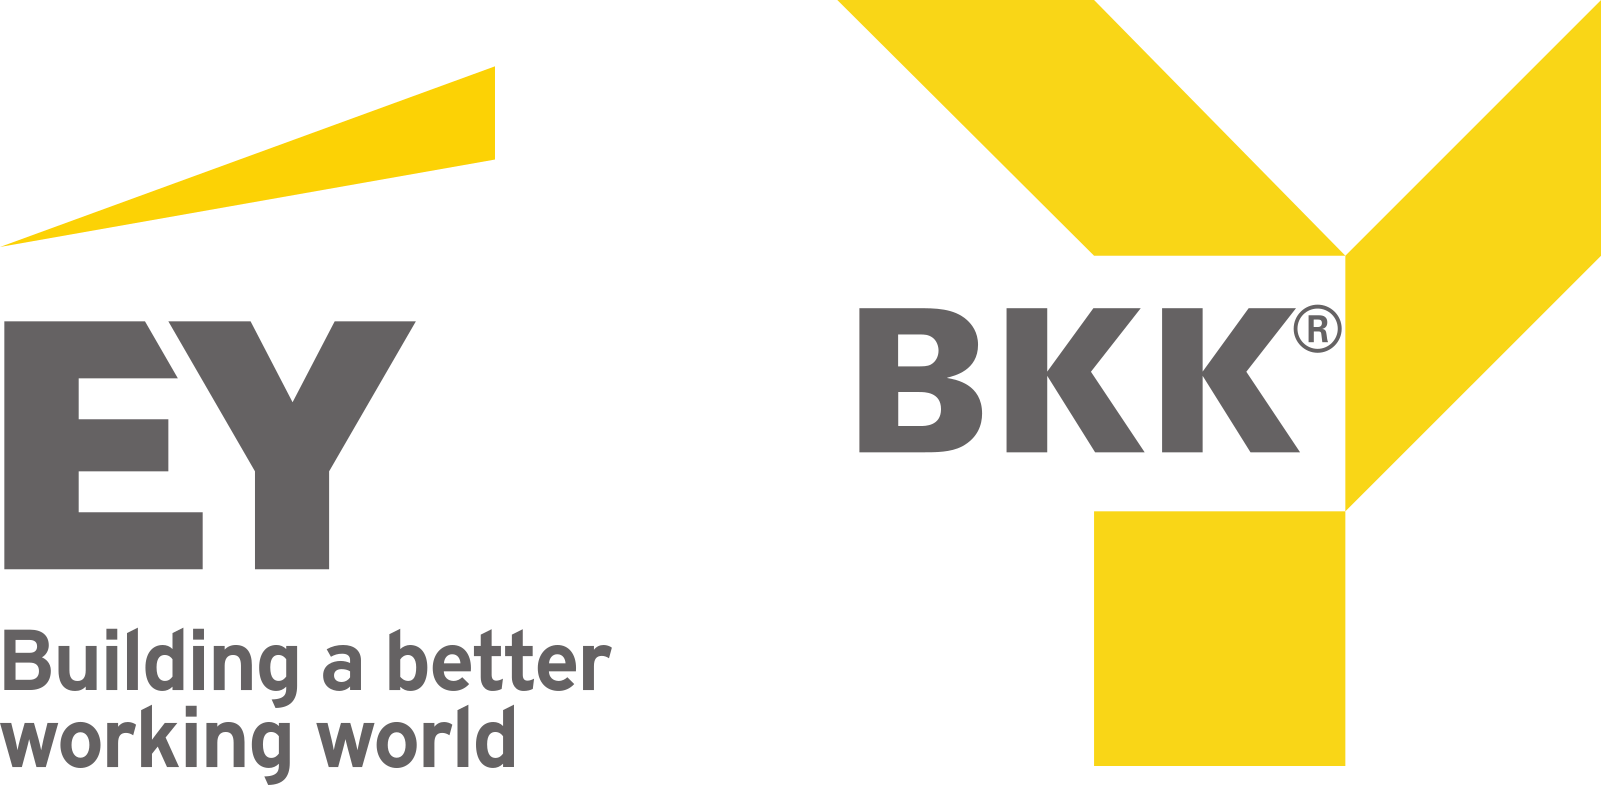 Download Ernst Young Bkk Logo Ernst Young Logo 2018 Png Image With No Background Pngkey Com